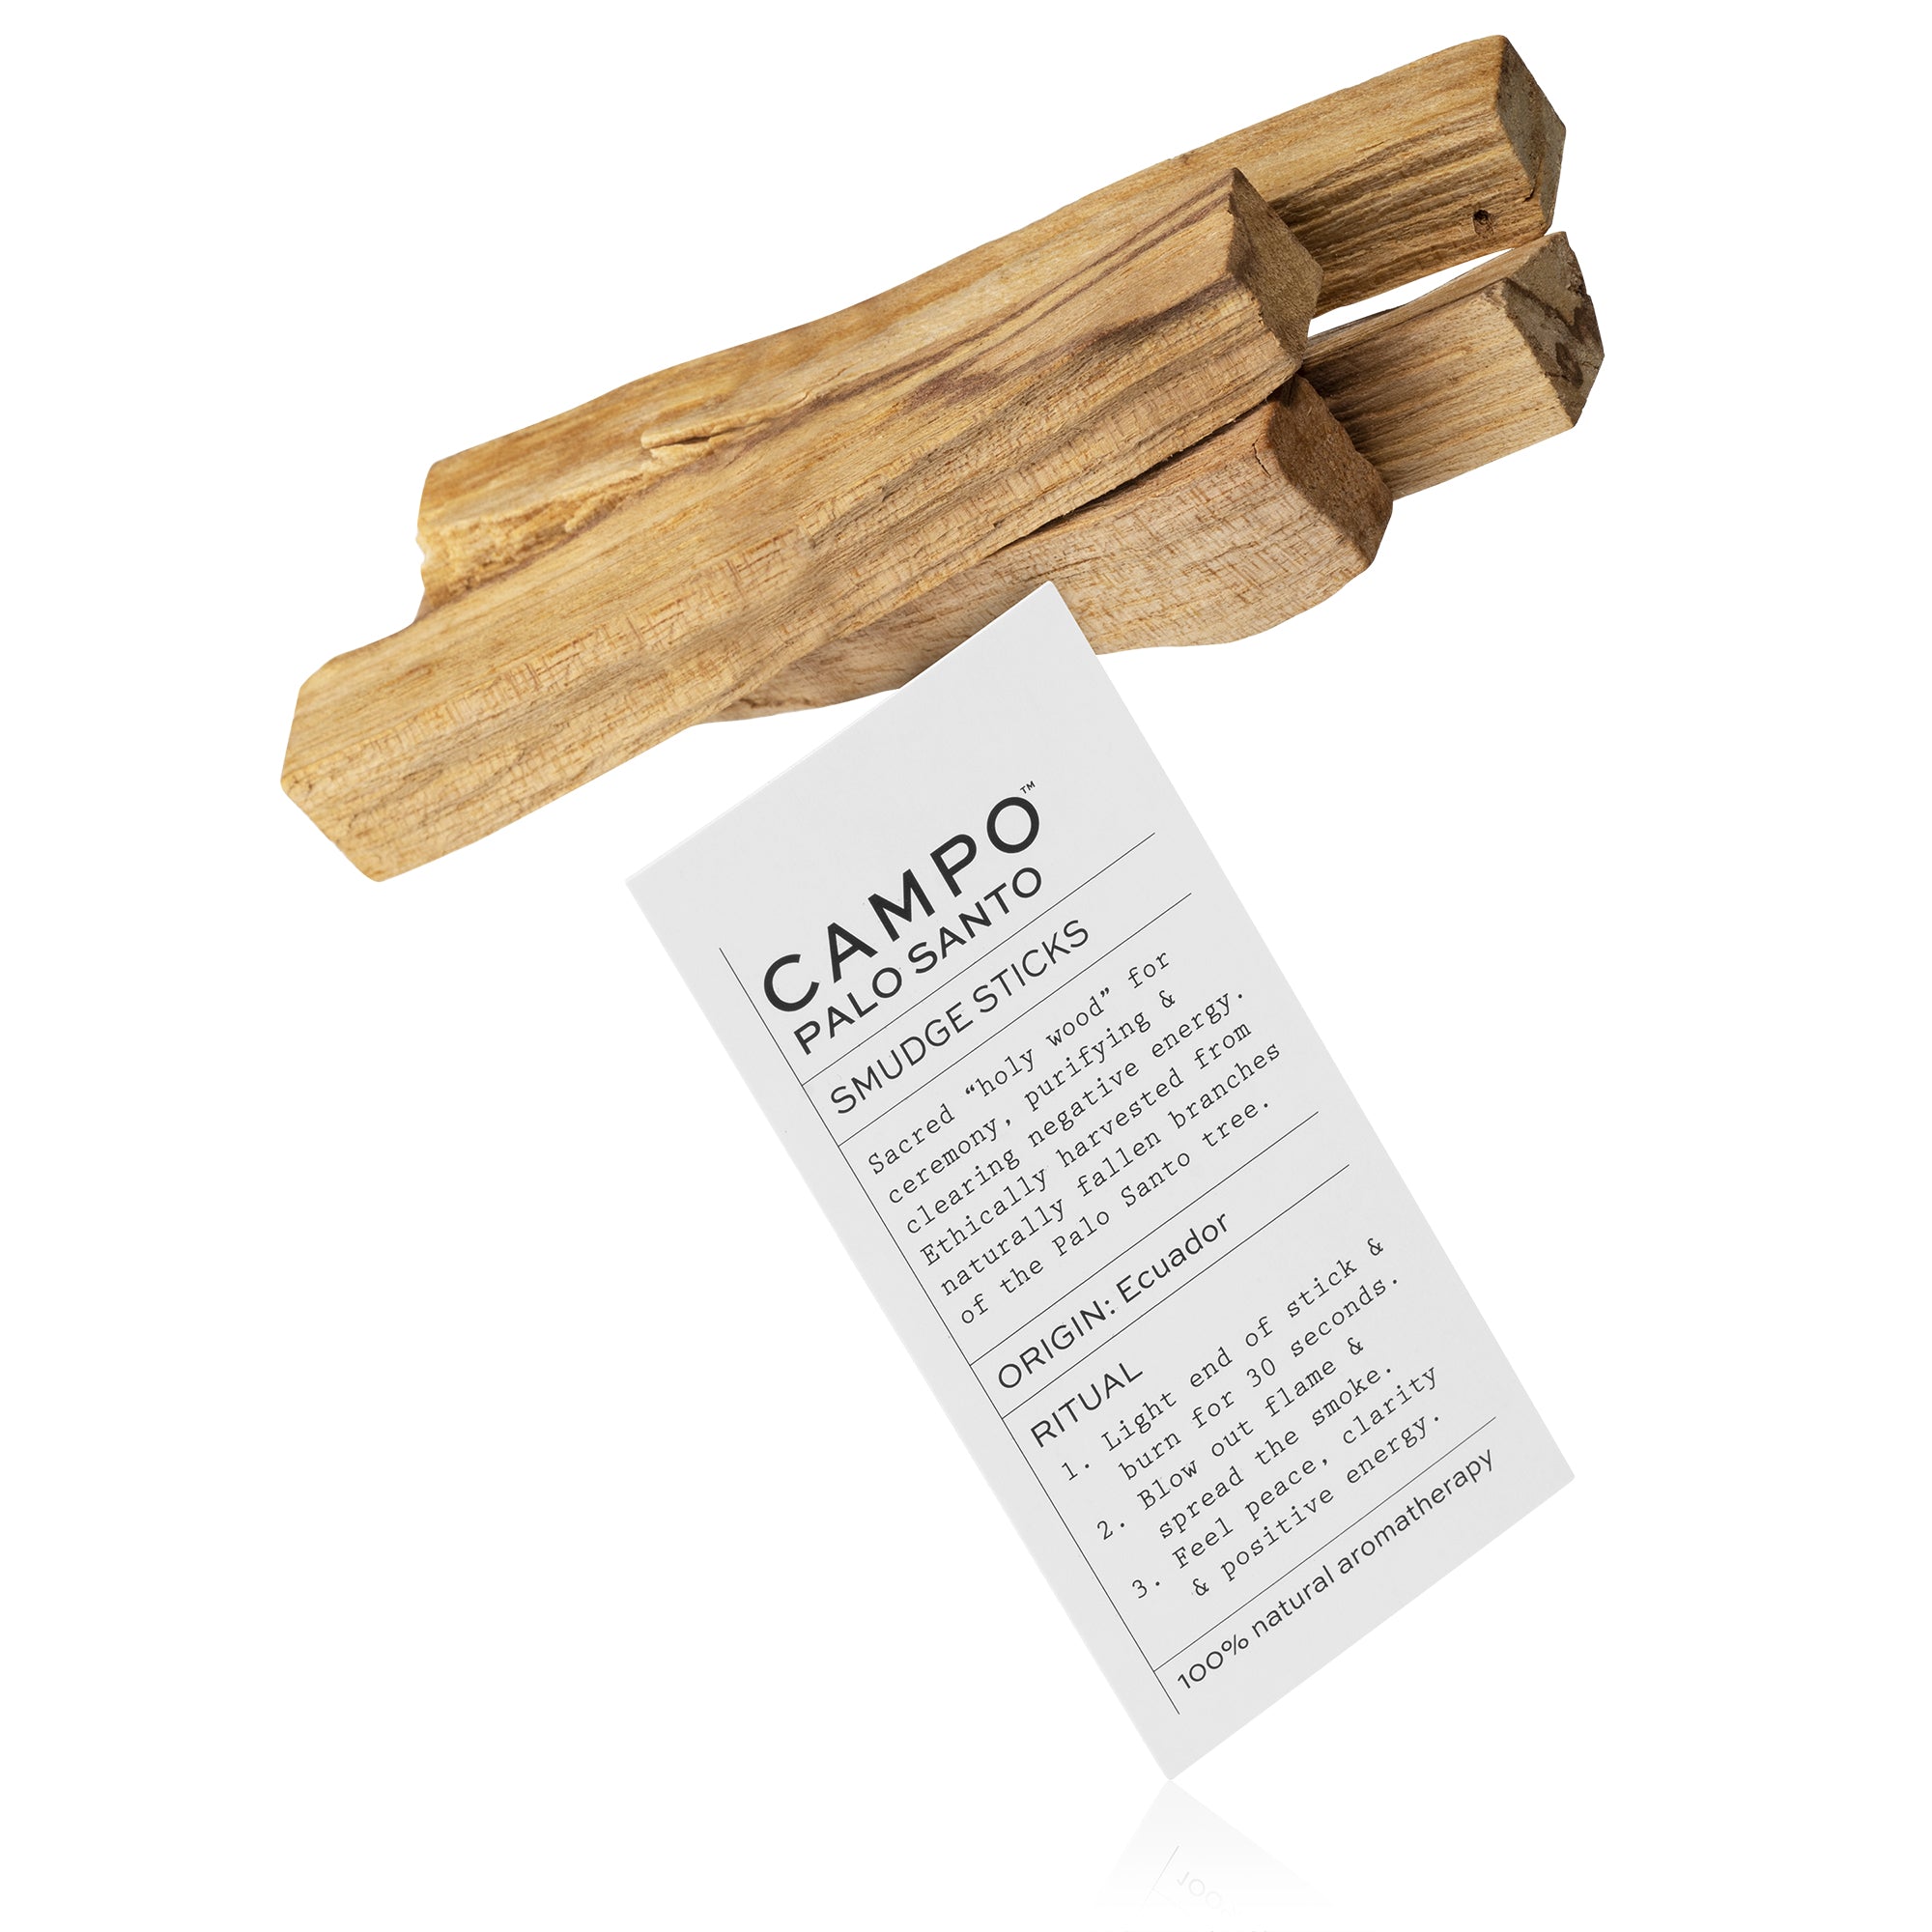 A sacred aromatic "holy wood" used for centuries as a spiritual remedy to cleanse, purify & clear negative energy.   Ethically harvested from naturally fallen branches of the Palo Santo tree. It has a fine citrus aroma with underlying notes of frankincense.